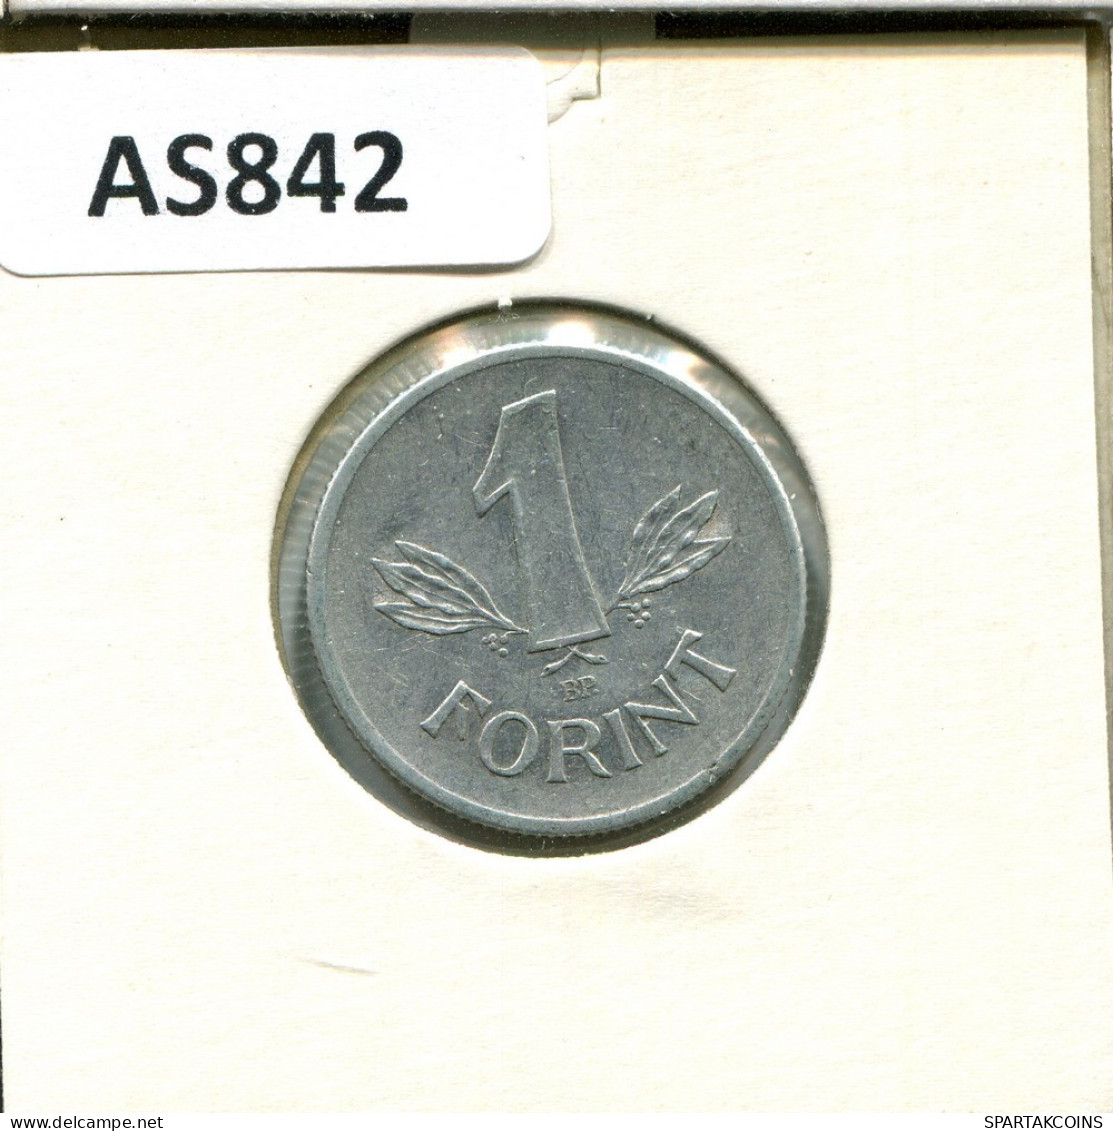 1 FORINT 1975 HUNGARY Coin #AS842.U.A - Ungheria